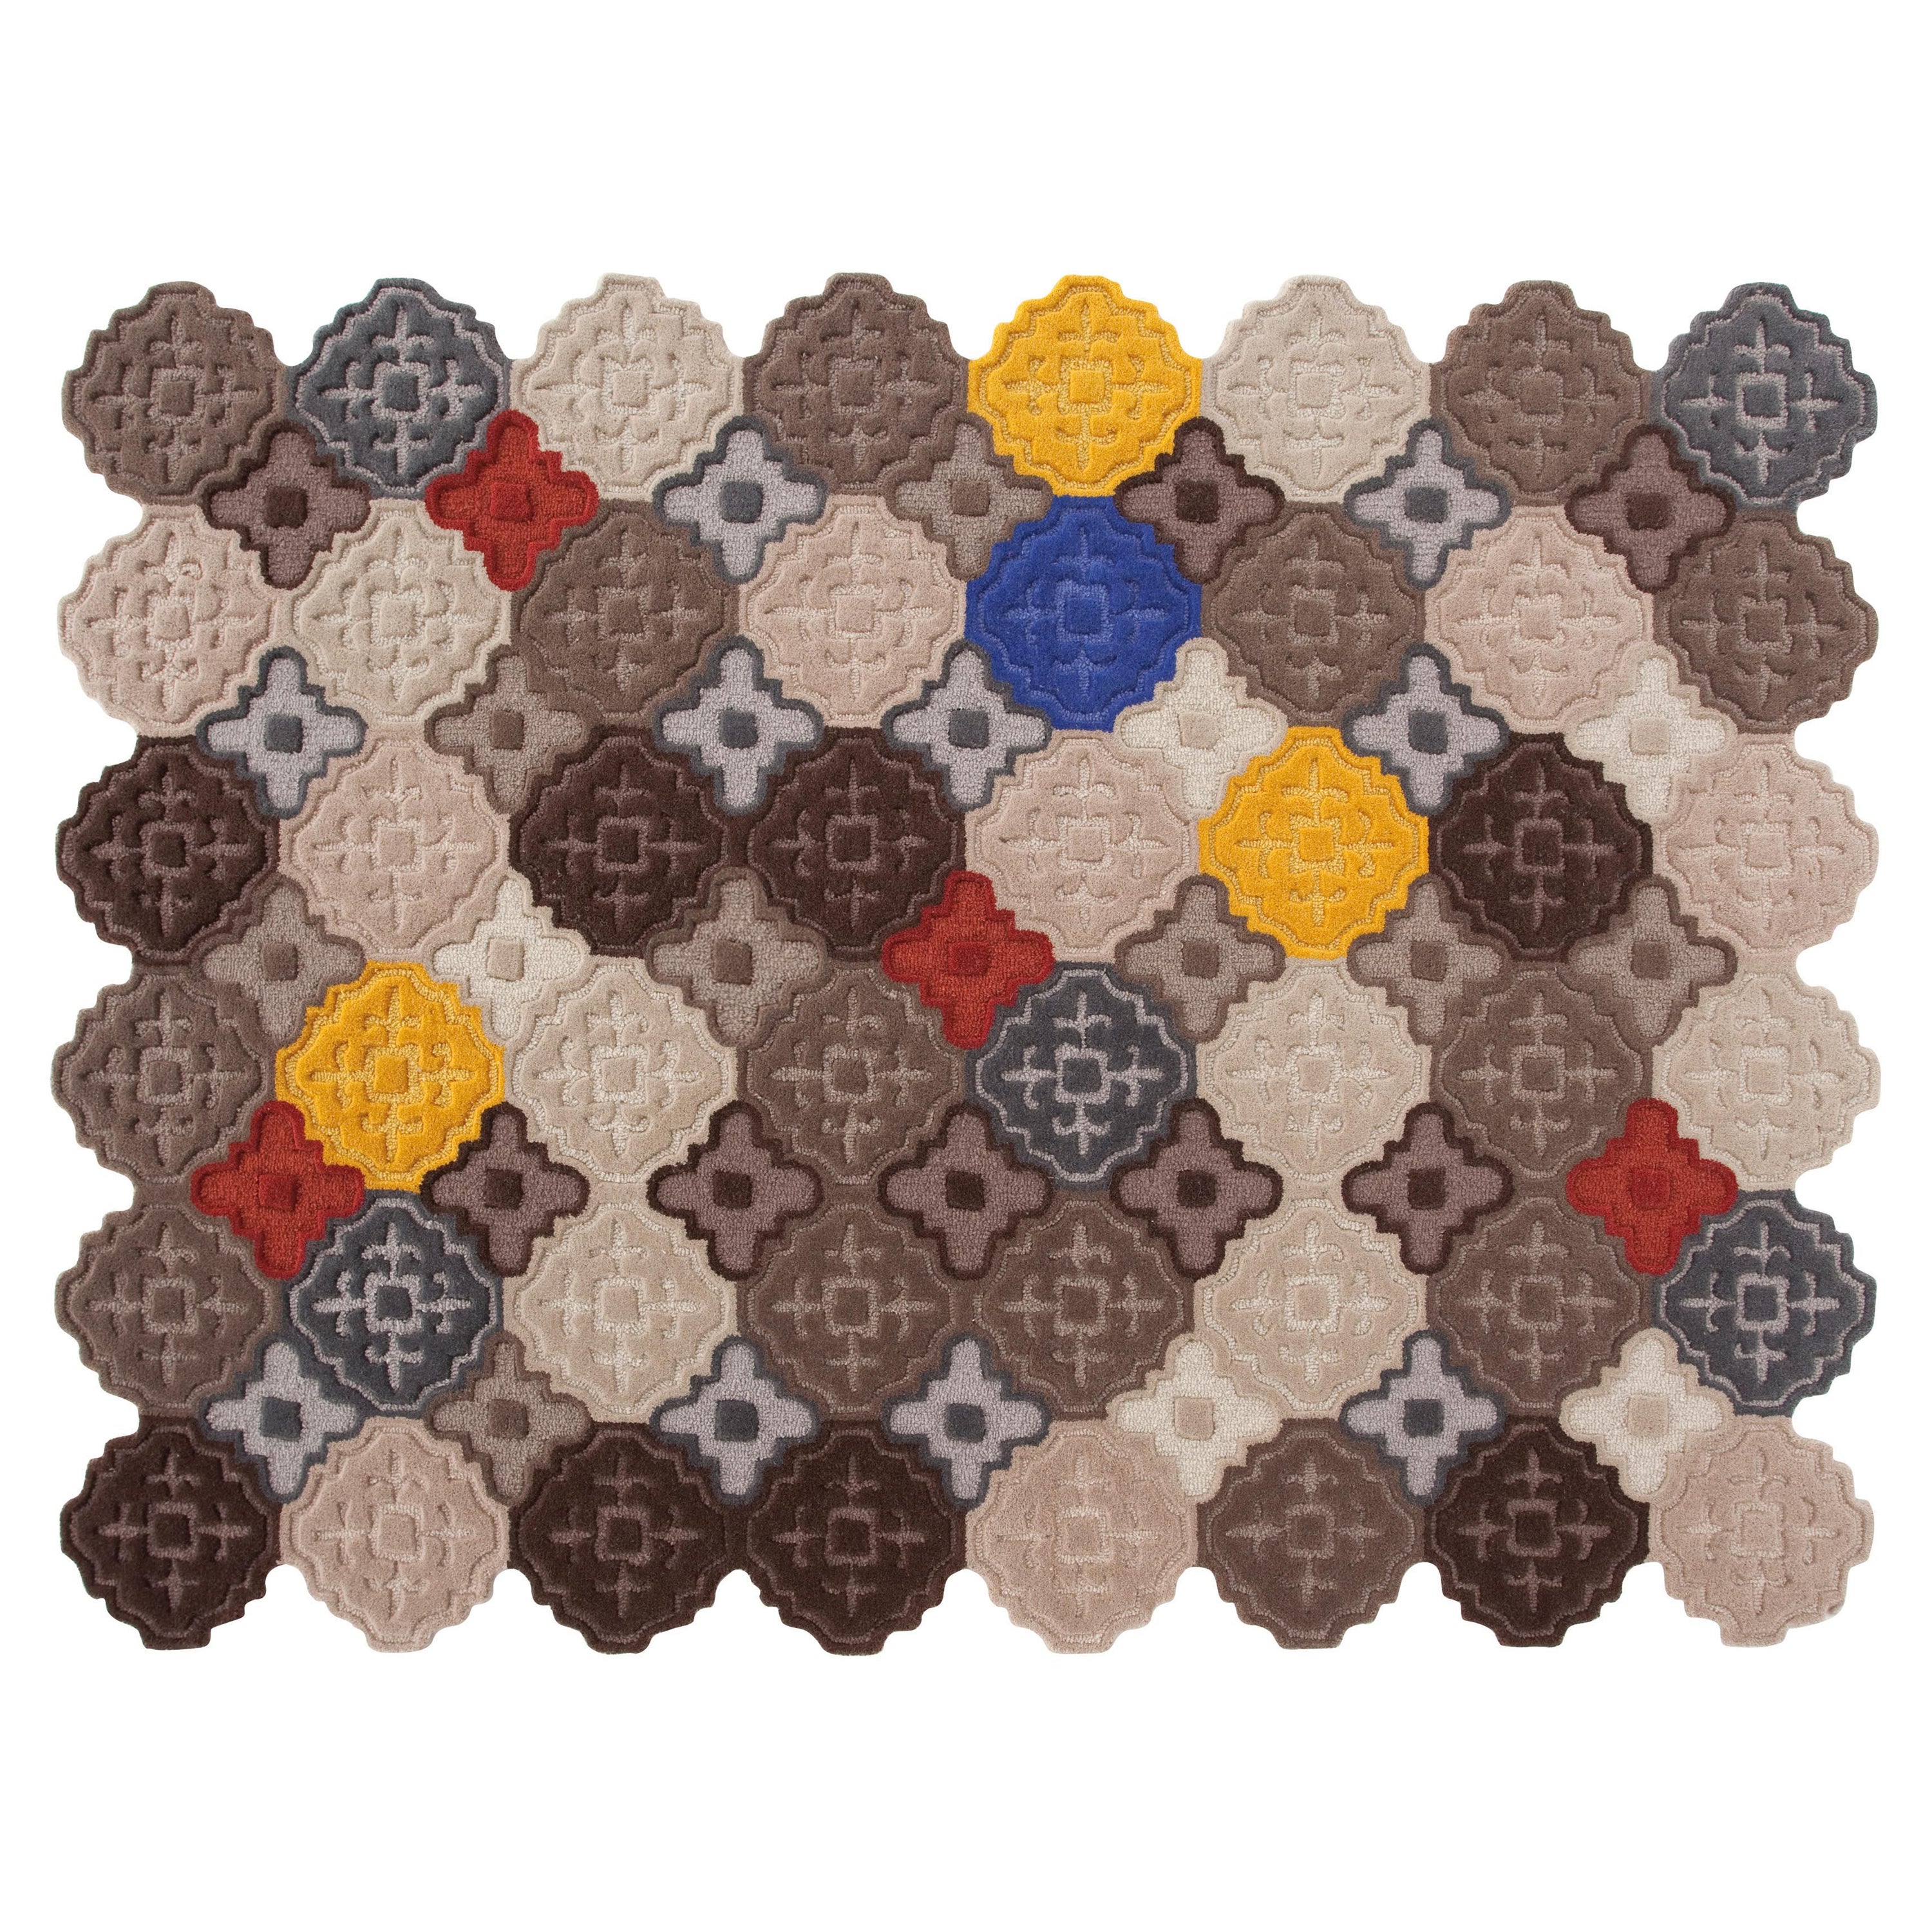 GAN Hidra Large Wool Rug in Multi-Color by Jose A. Gandía and Blasco For Sale